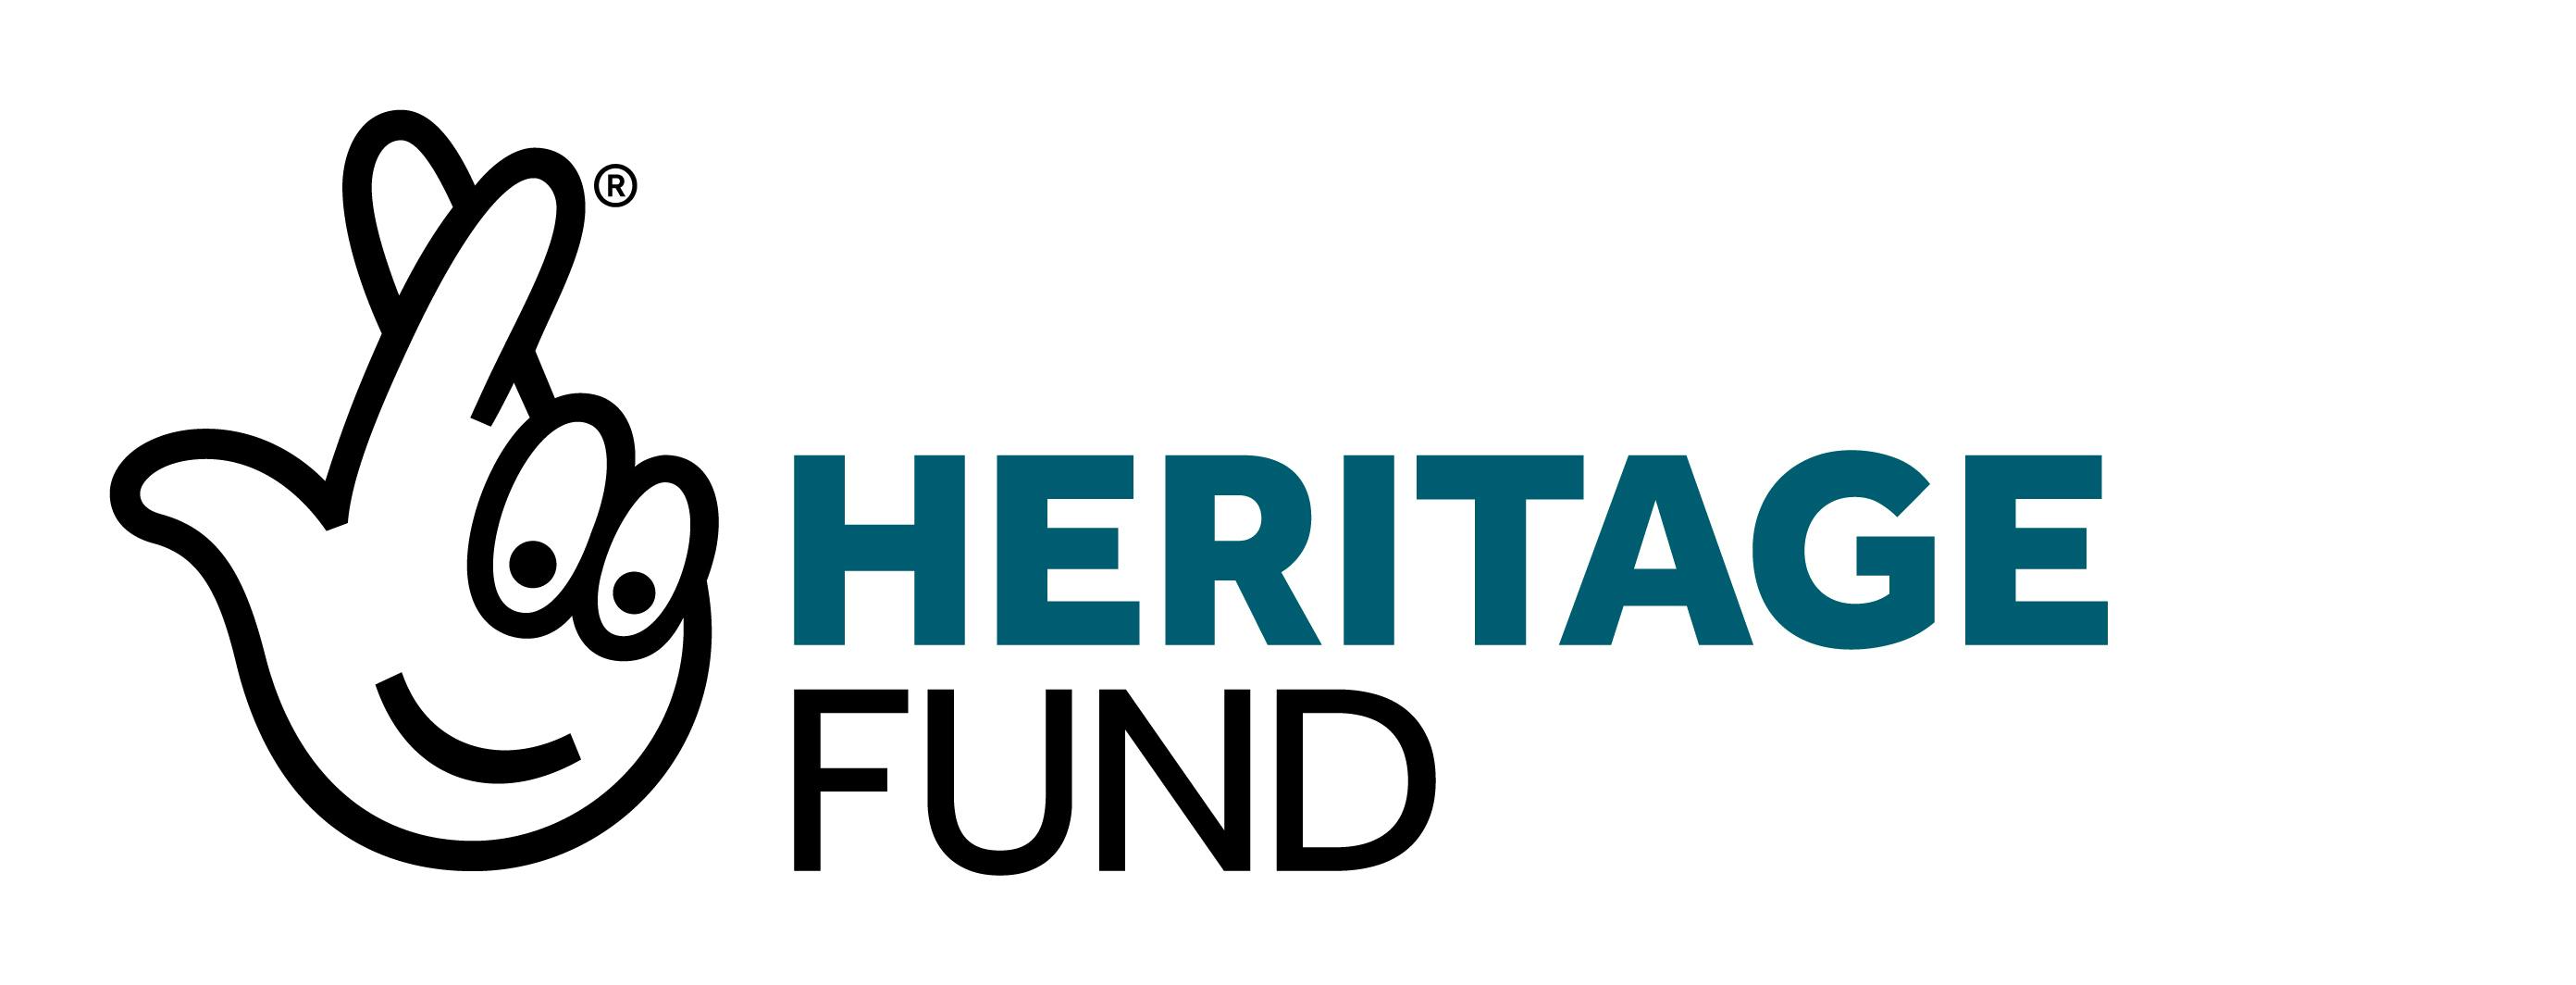 National Lottery Heritage Fund.jpg